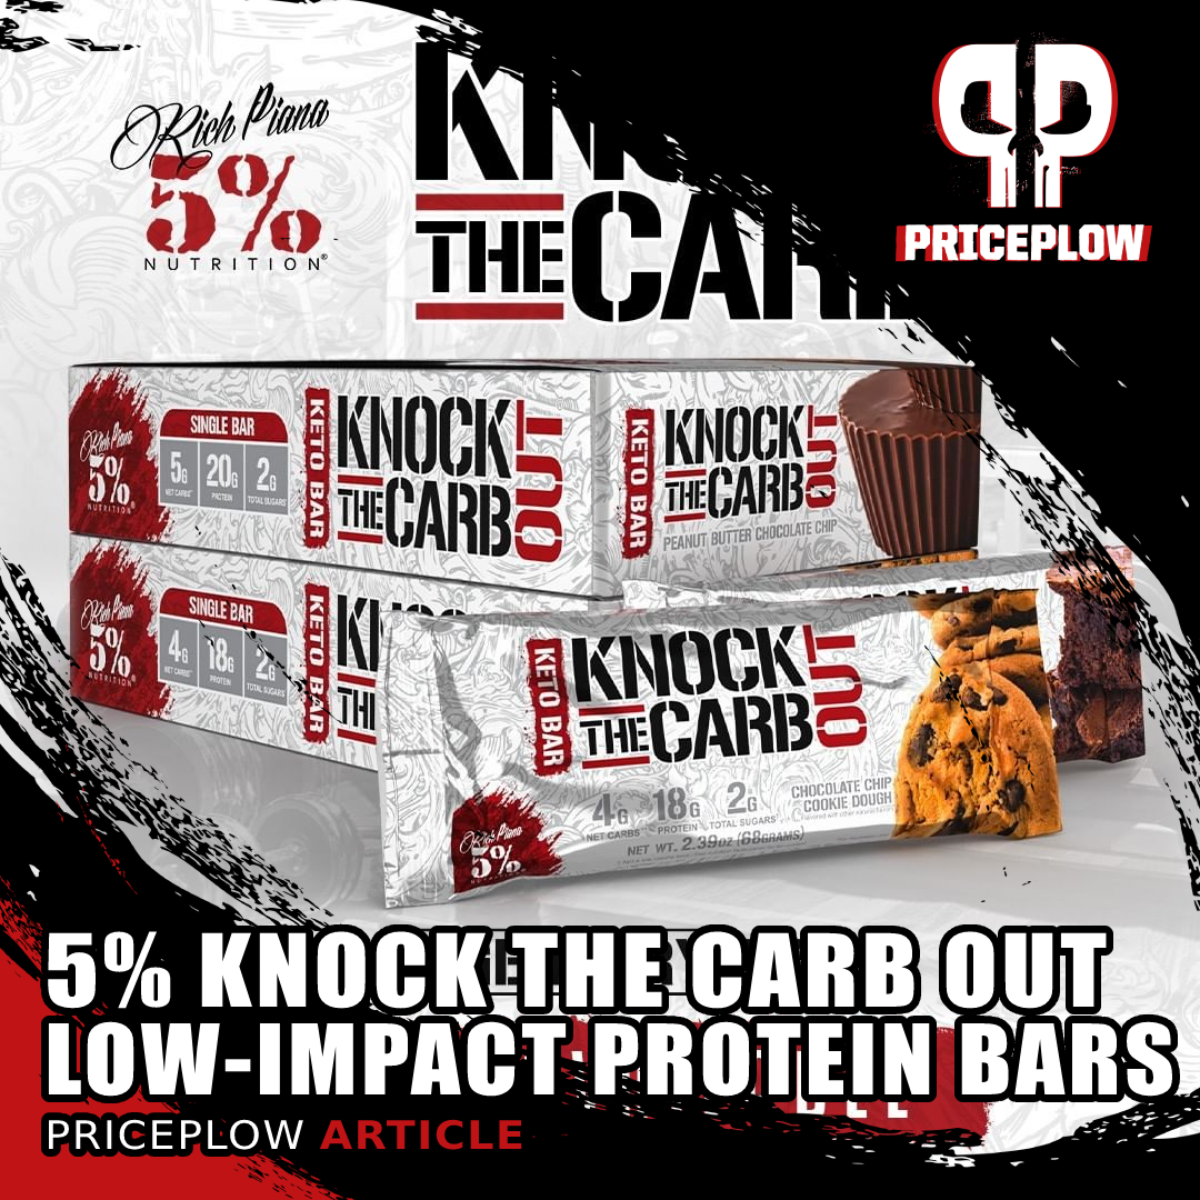 5% NUTRITION KNOCK THE CARB OUT BARS 10-PACK BOX rich piana keto protein ktco 